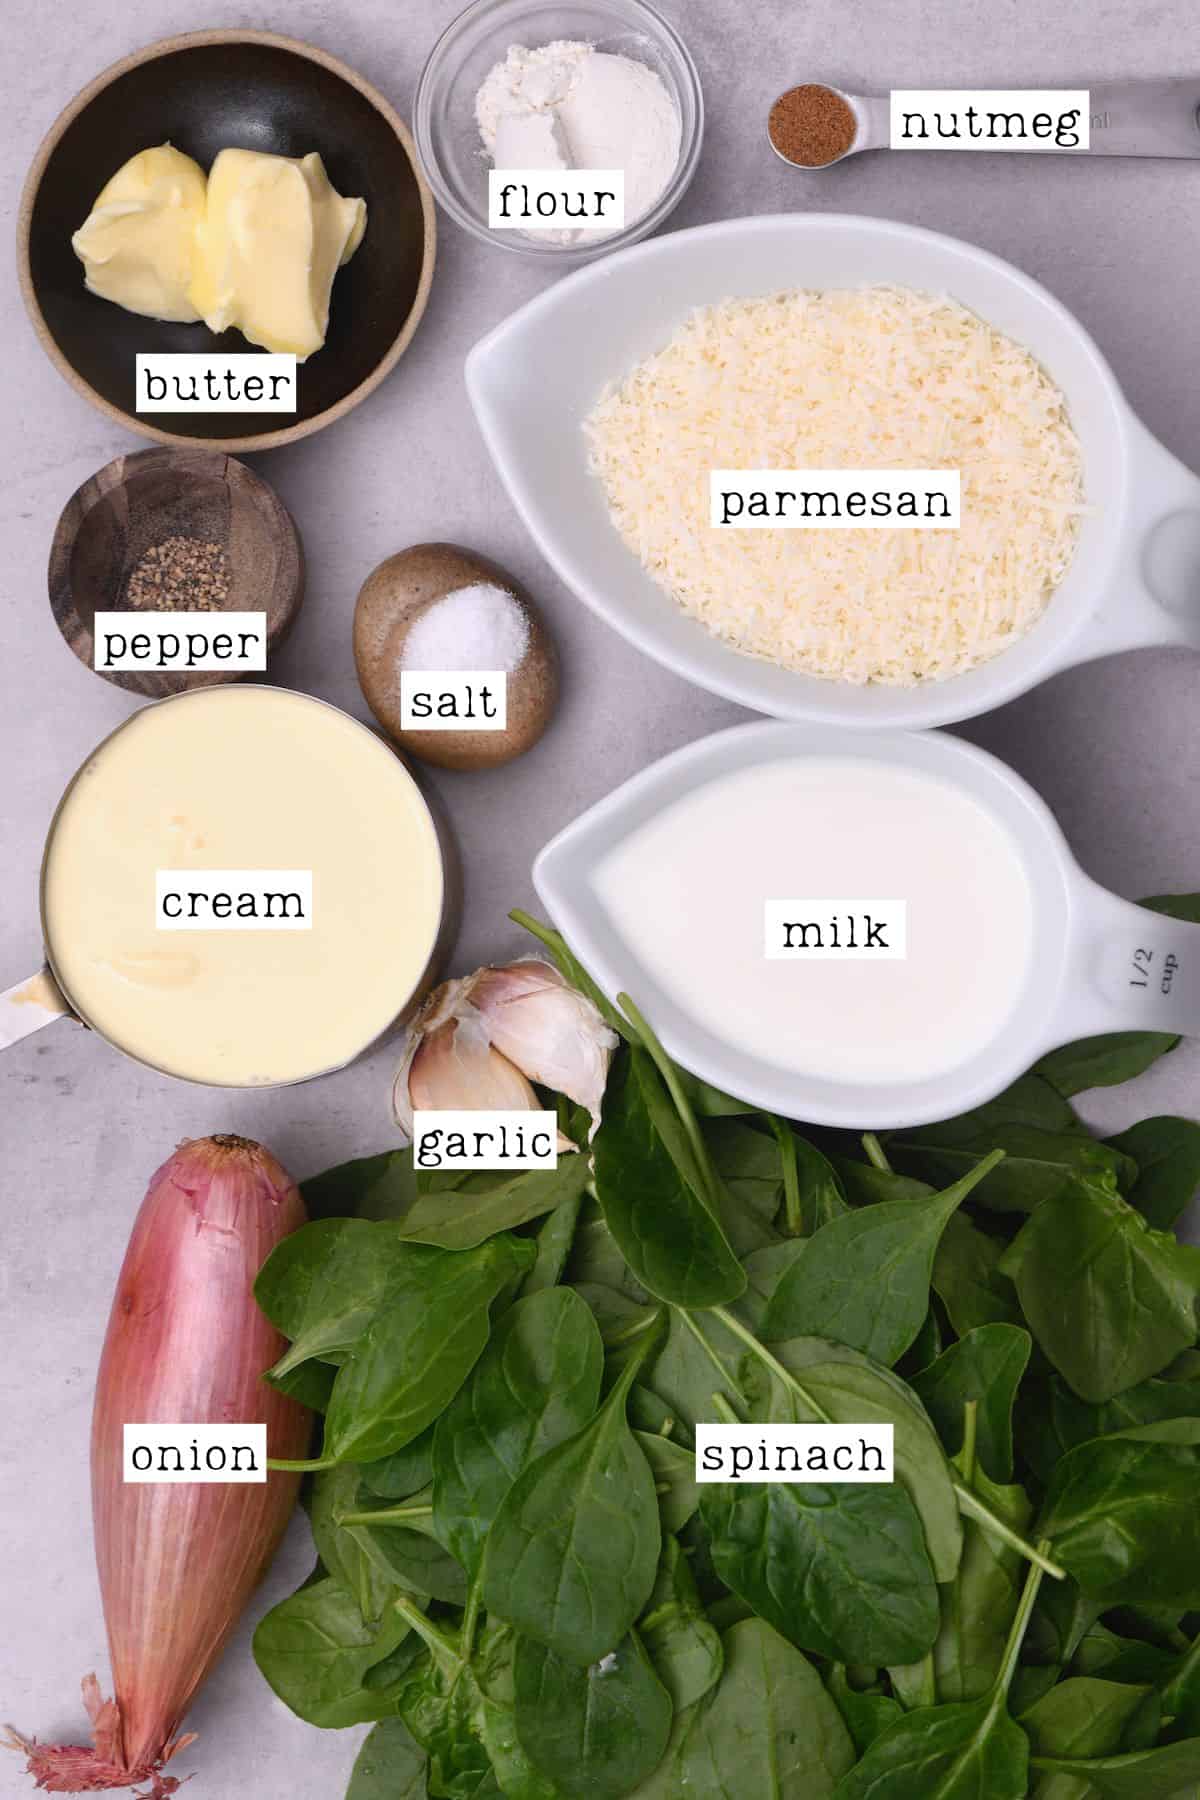 Ingredients for creamed spinach